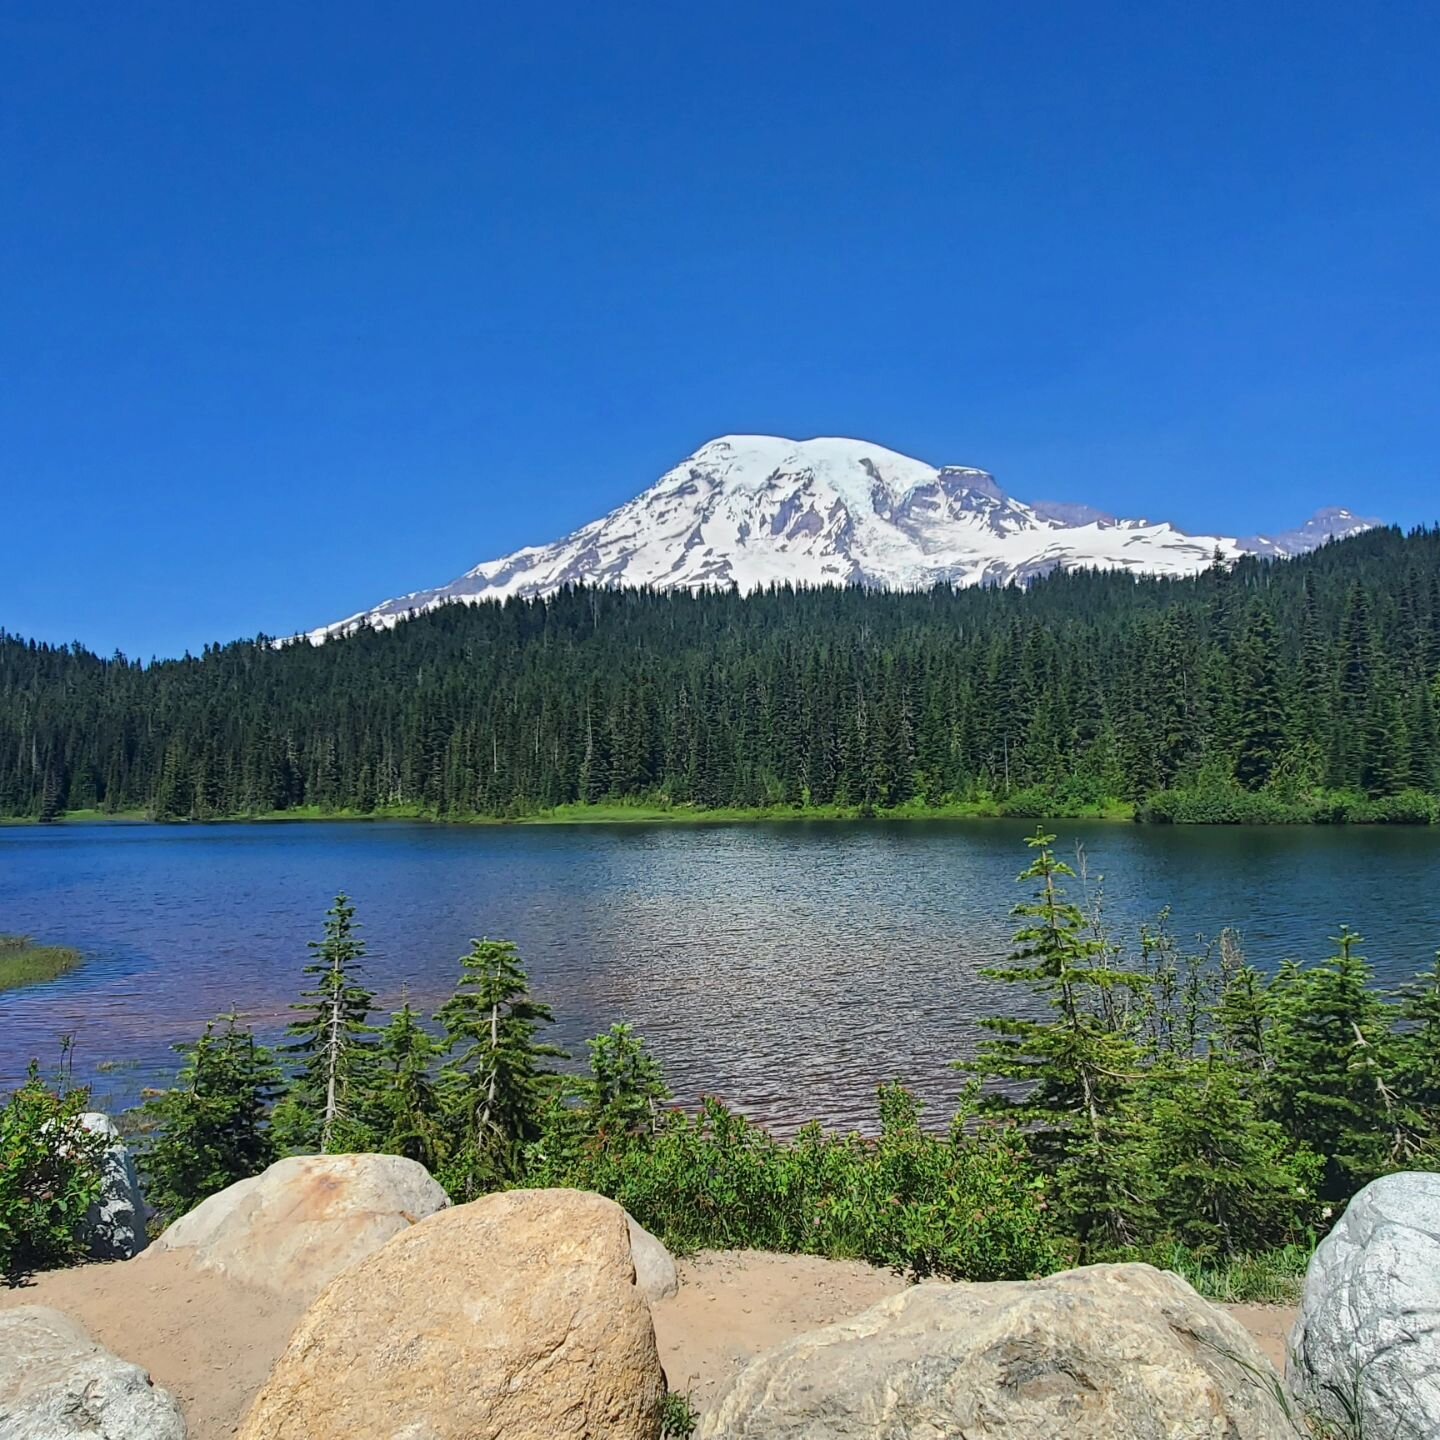 &quot;Embarking on a breathtaking journey to Mt. Rainier's Paradise Entrance! 🏞️✨ Nature's masterpiece unfolds with every step, surrounded by towering evergreens and crisp mountain air. Paradise found at the foot of Rainier &ndash; where adventure m